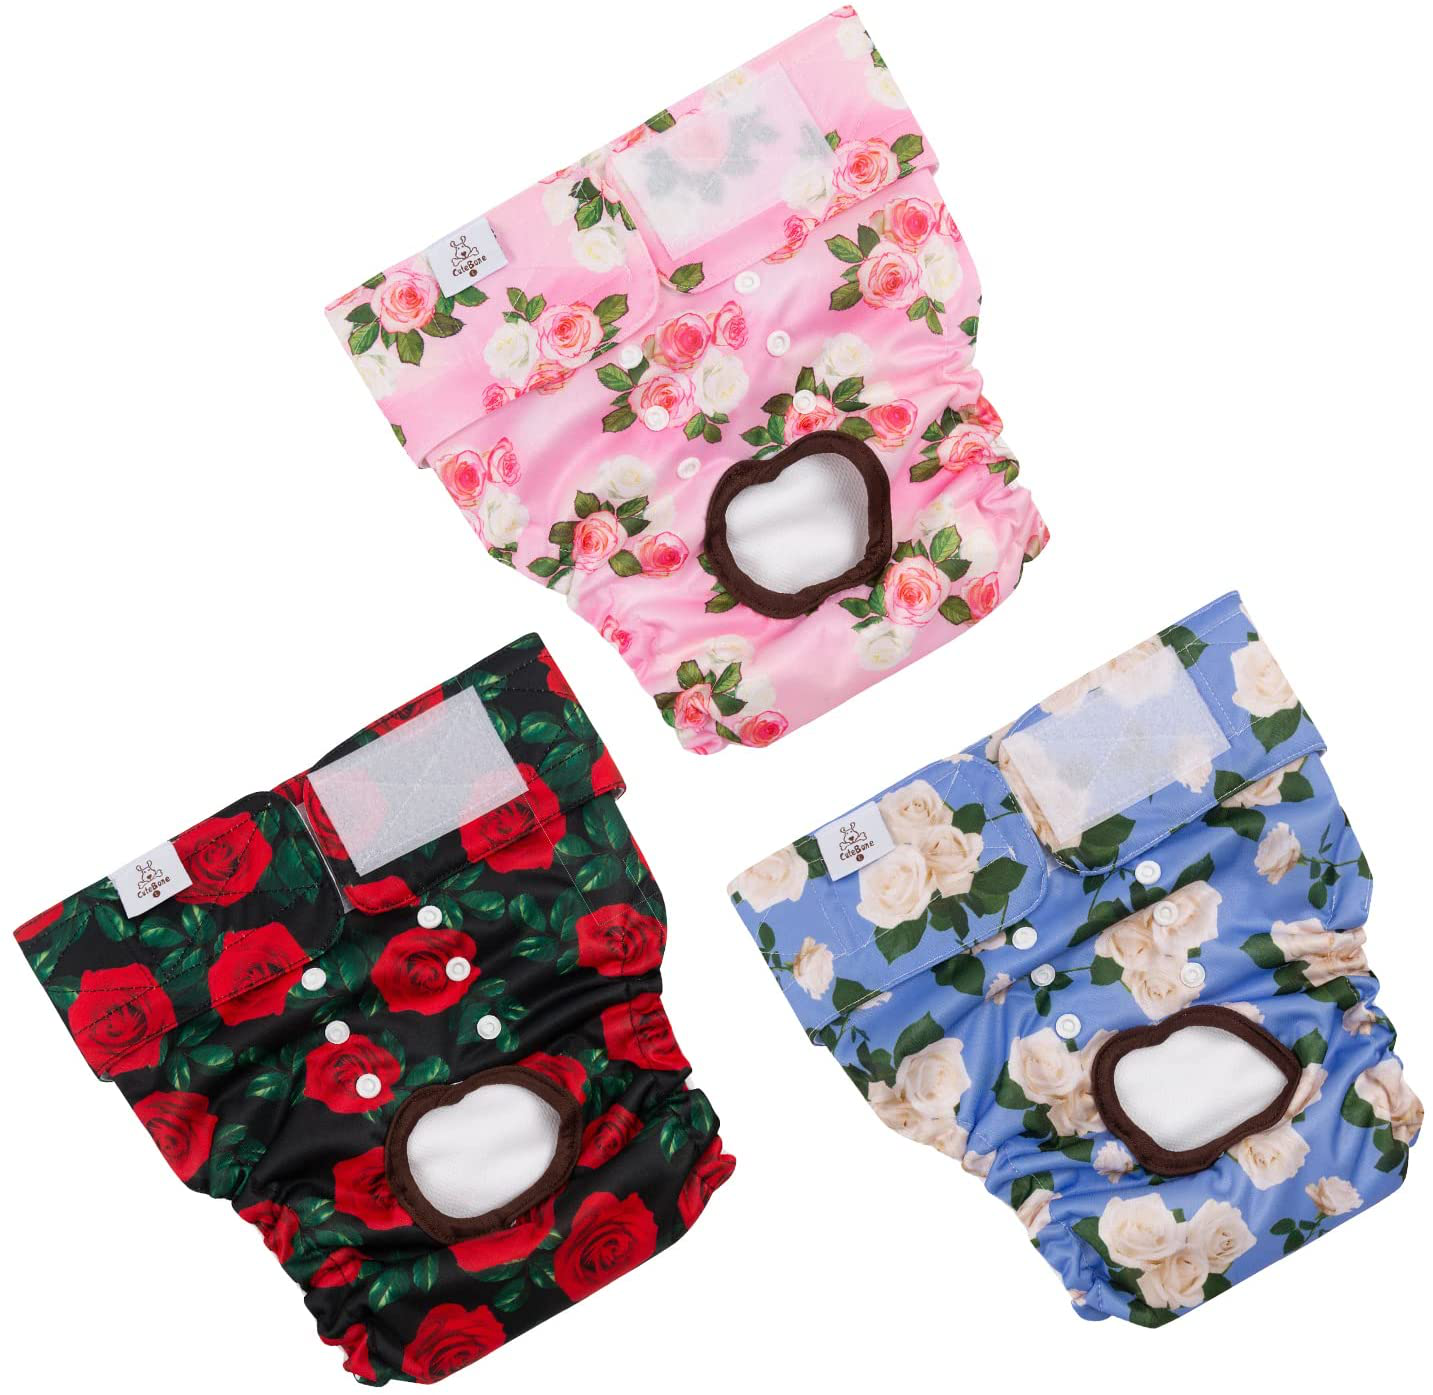 Cutebone Reusable Dog Diapers Female 3 Pack Washable Puppy Pants for Doggie Heat Period